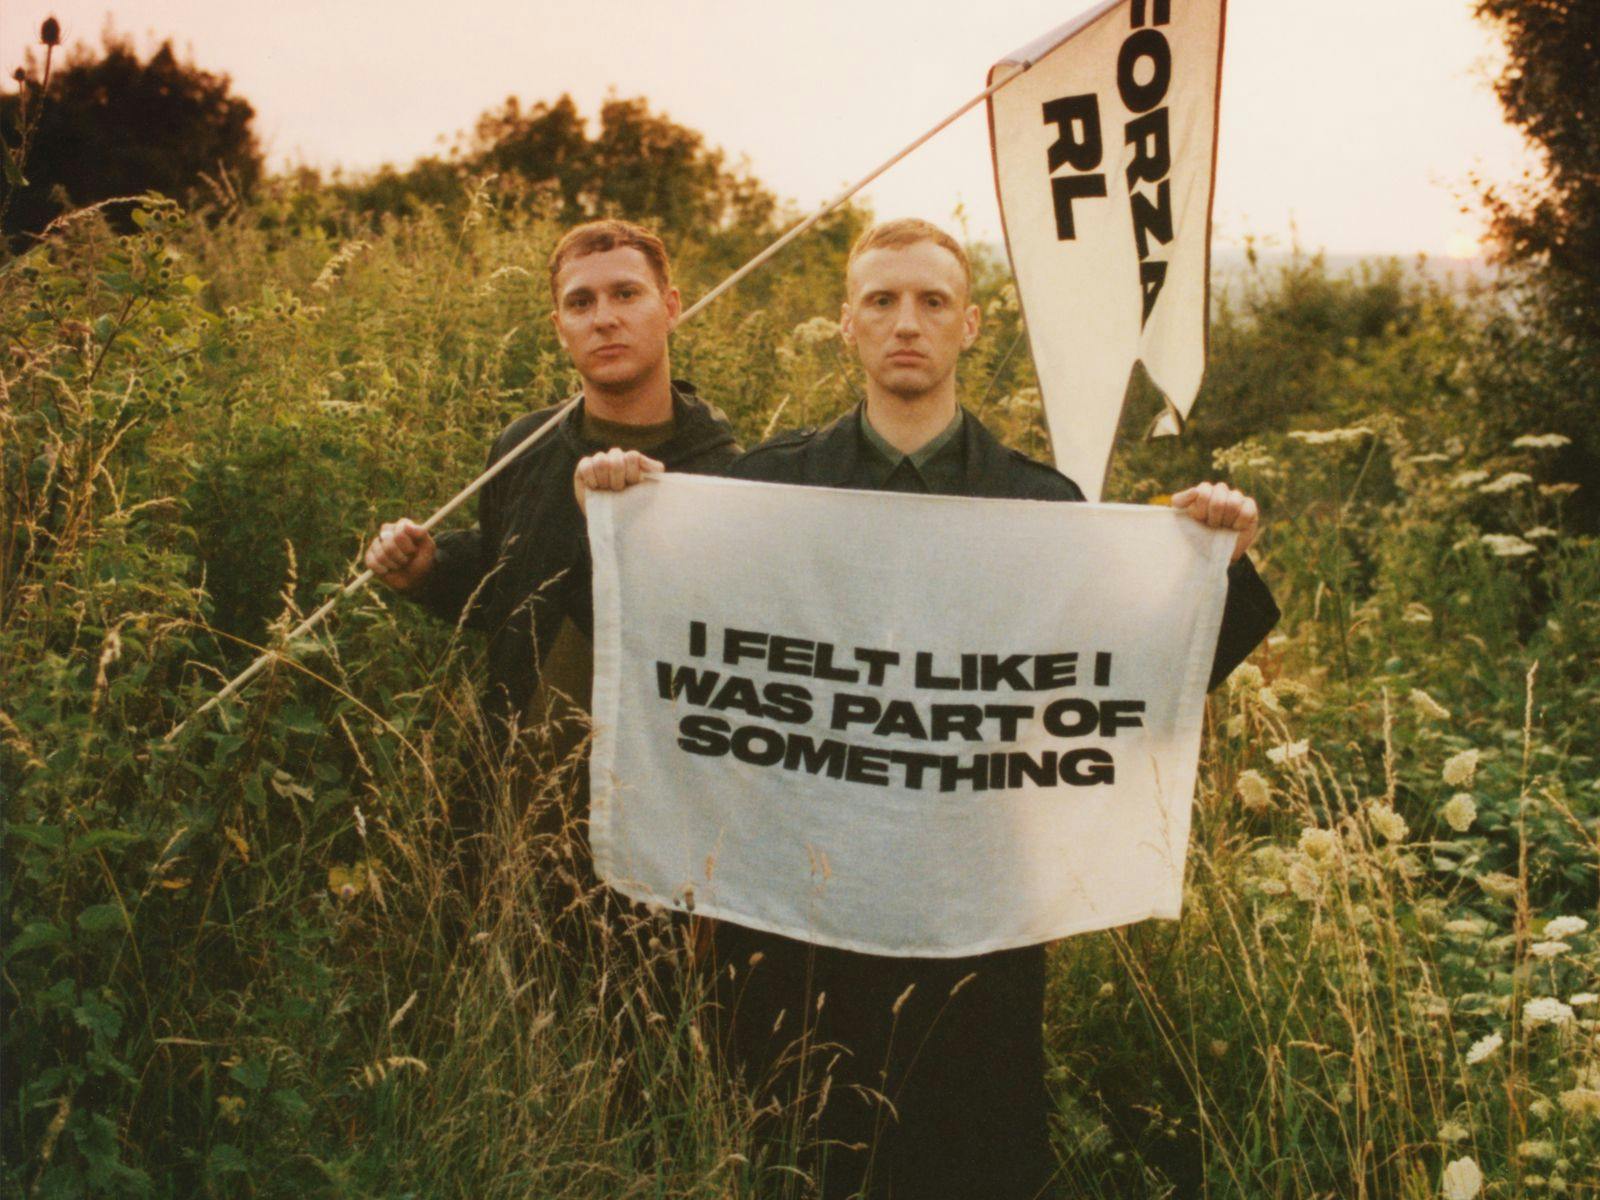 Real Lies holding up a cloth sign that reads "I felt like I was part of something"